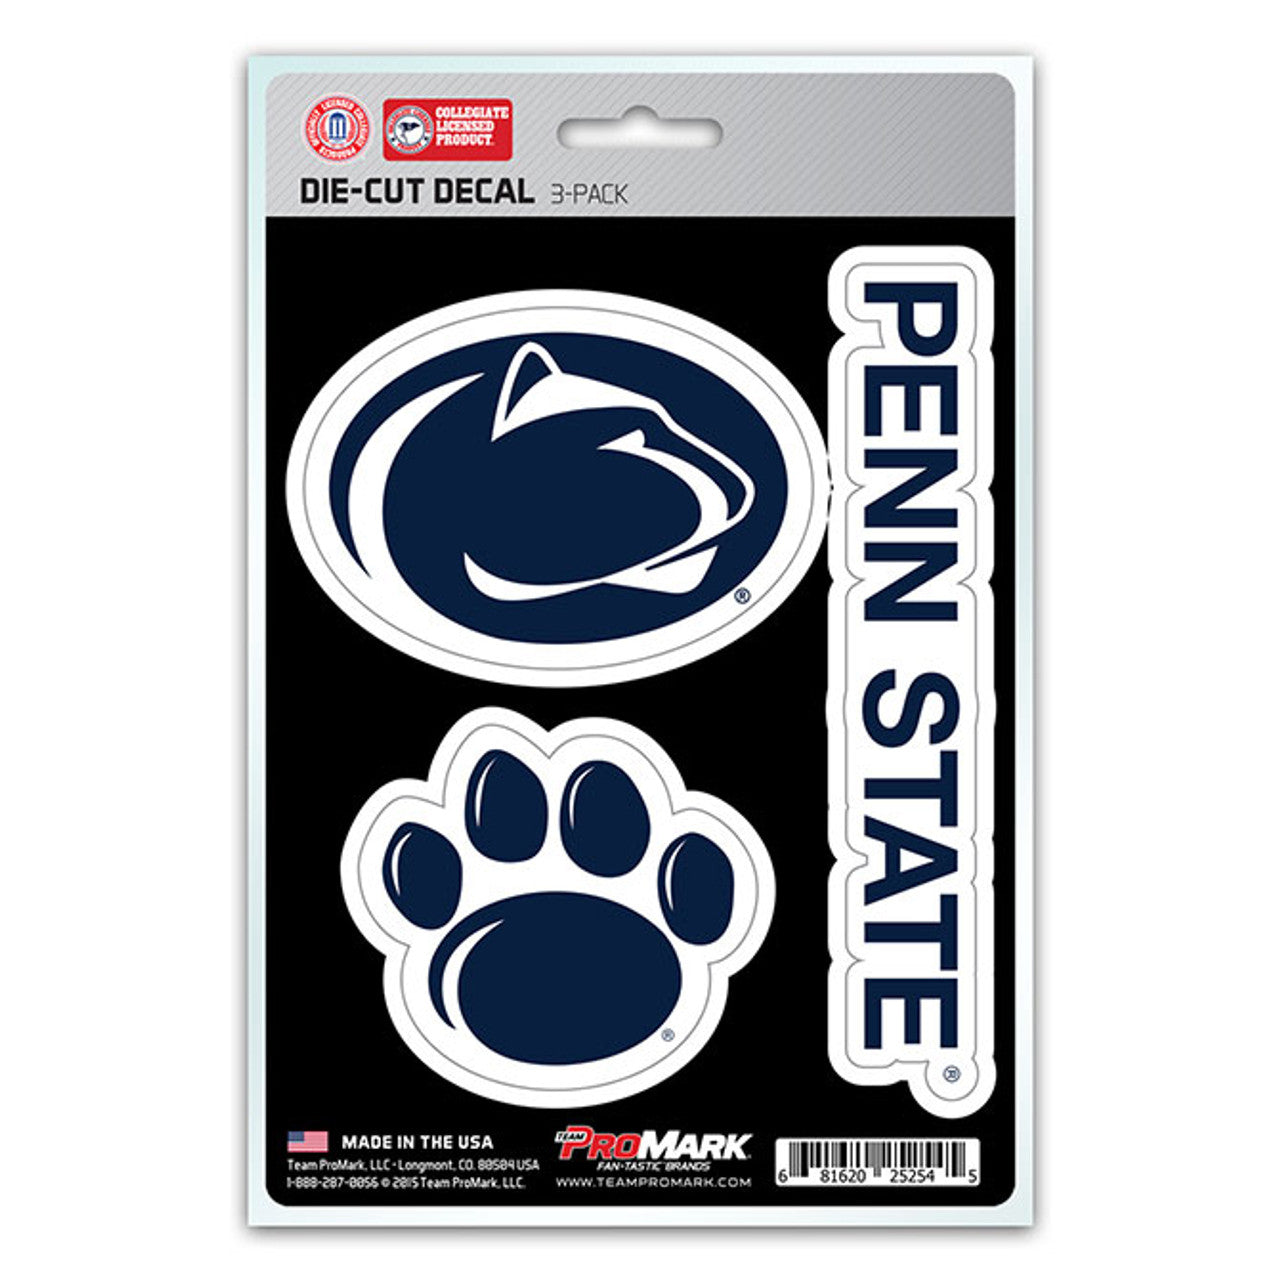 Penn State Nittany Lions 3 pack Die Cut Team Decals by Team Promark